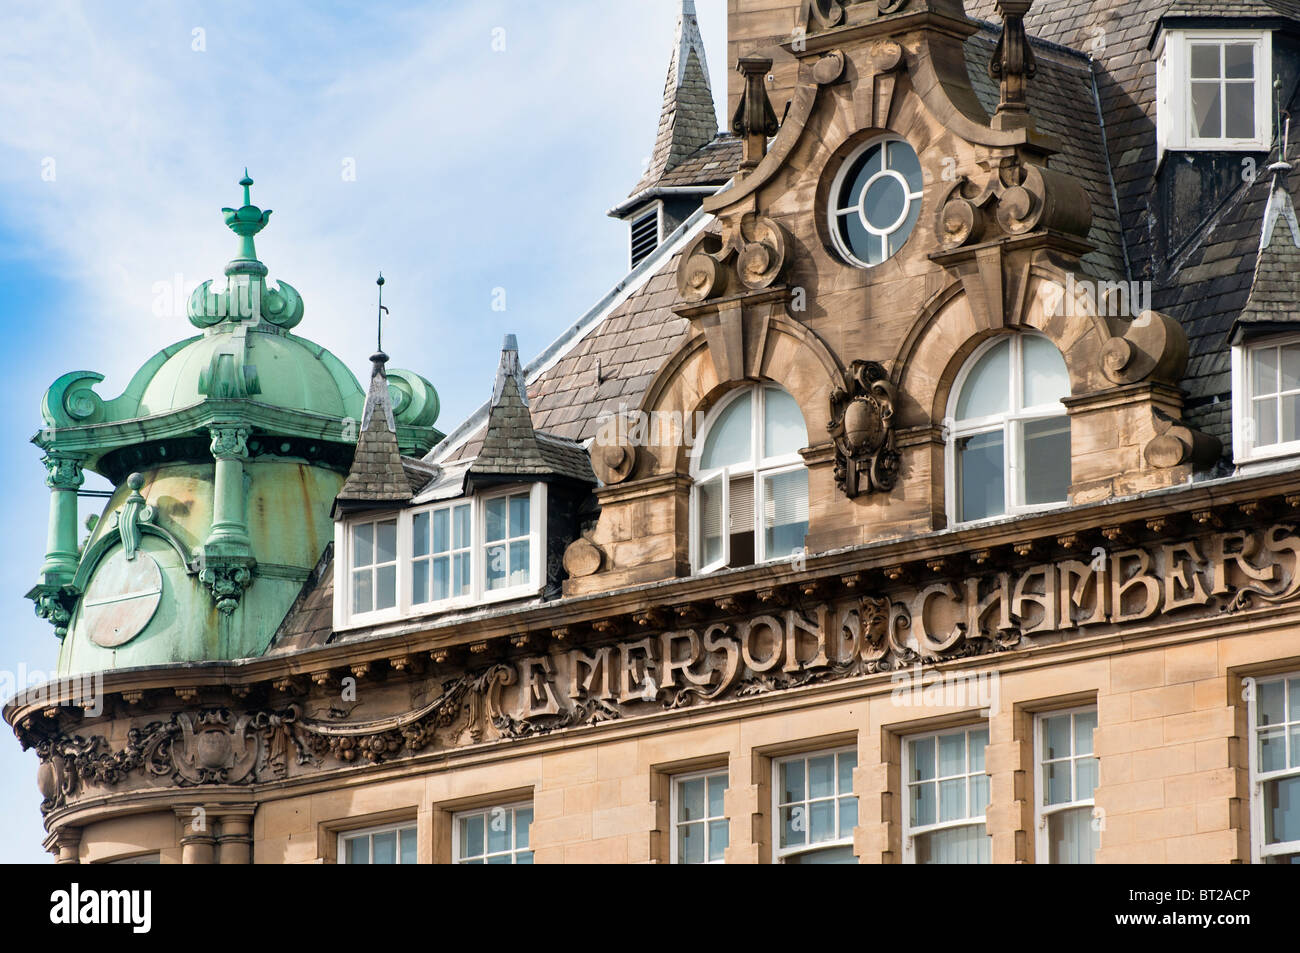 Emerson Chambers, a grade two listed building of Baroque style in central Newcastle-upon-Tyne, England. Stock Photo